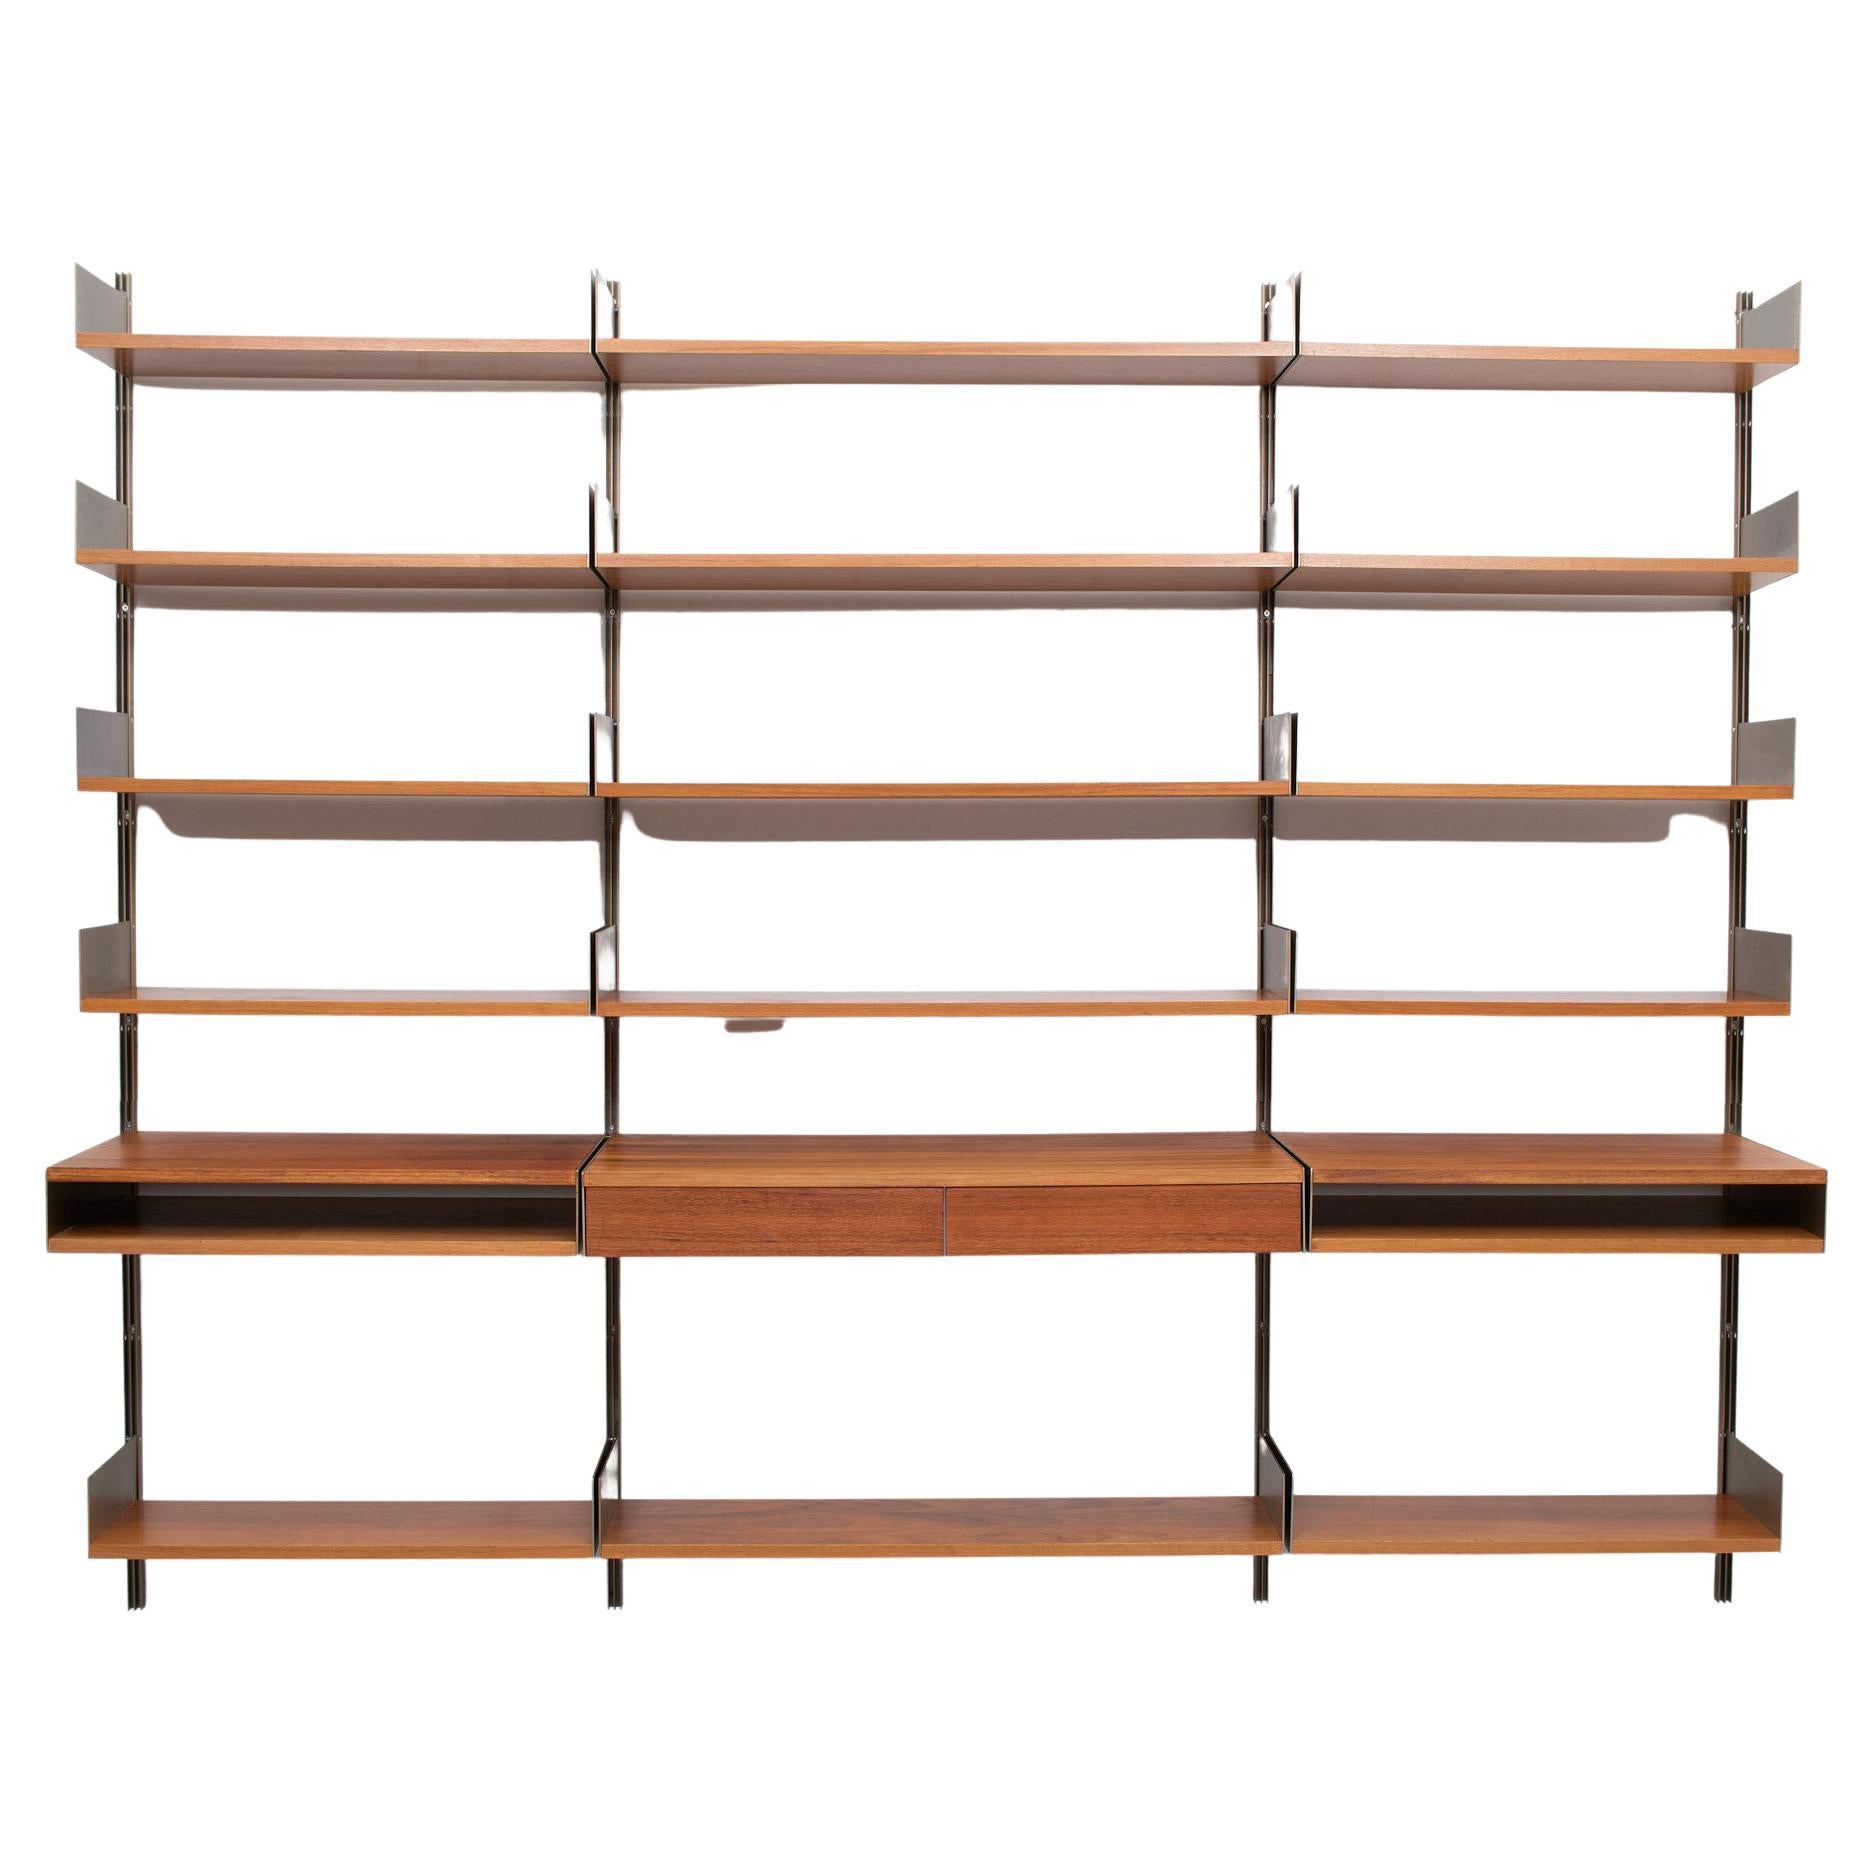 Beautiful wall unit, Comes in warm Walnut color. Bronze color rails and high bookends at the end of each shelf. Can be Adjust to your personnel taste. 6 rails 15 shelves and 3 units one with 2 drawers.
Very nice condition. Designed by Dieter Rams